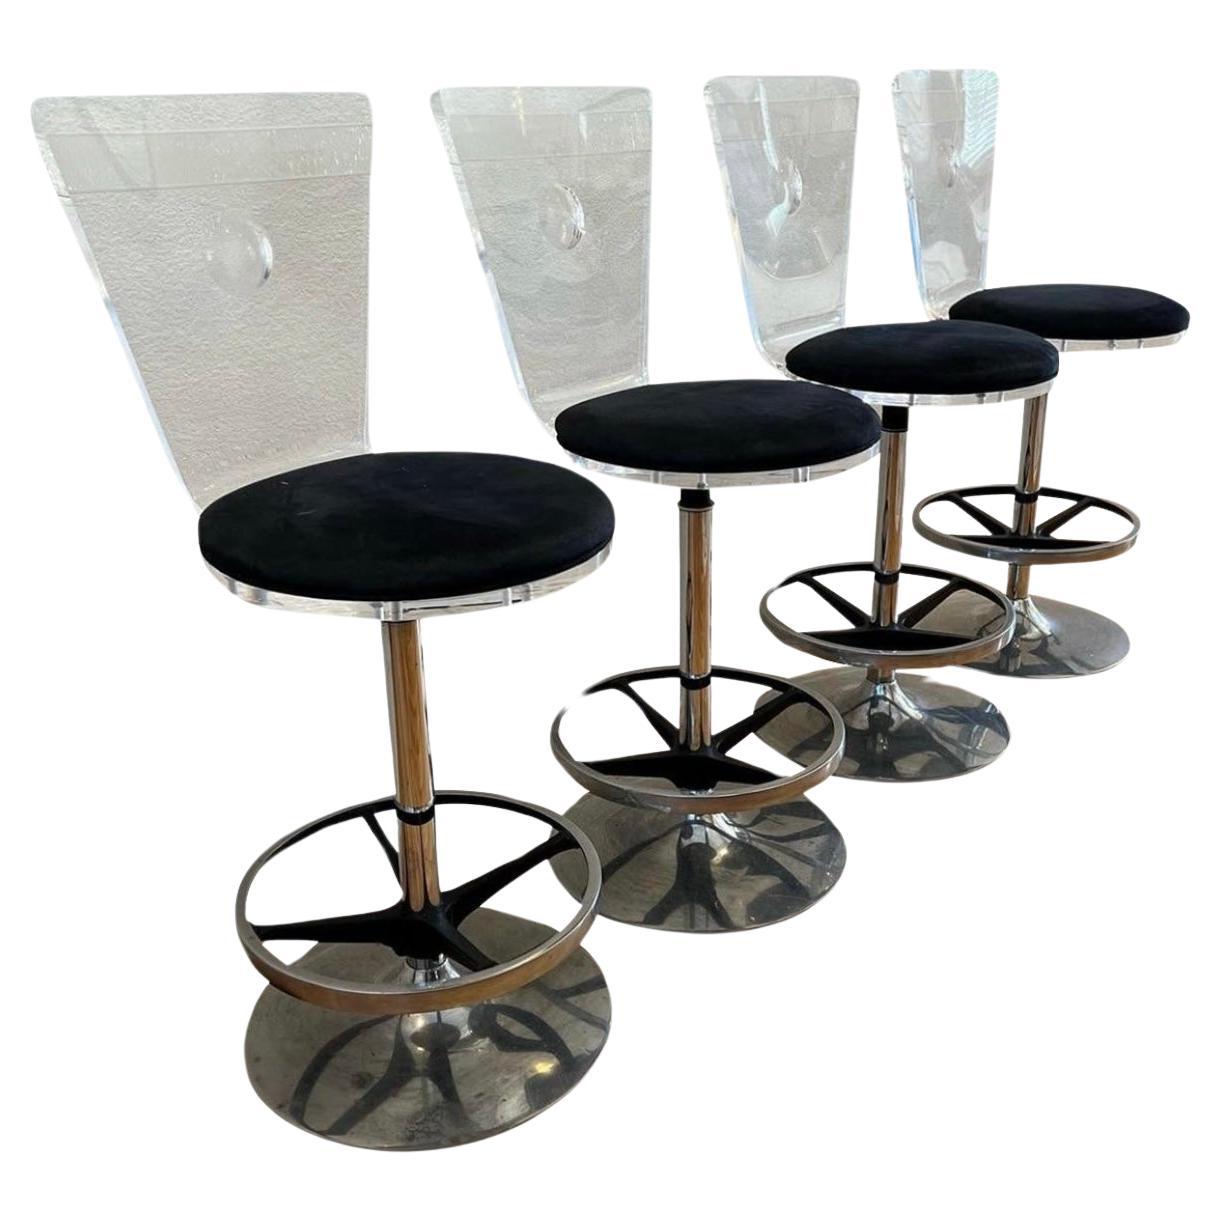 1980s Vintage Lucite and Chrome Swivel Counter Stools, Set of 4 chairs For Sale